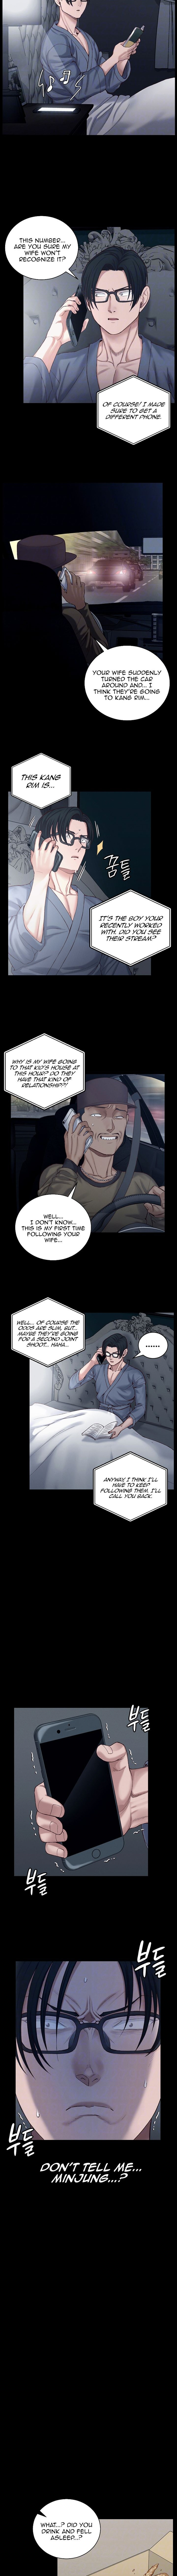 His Place - Chapter 126 Page 2